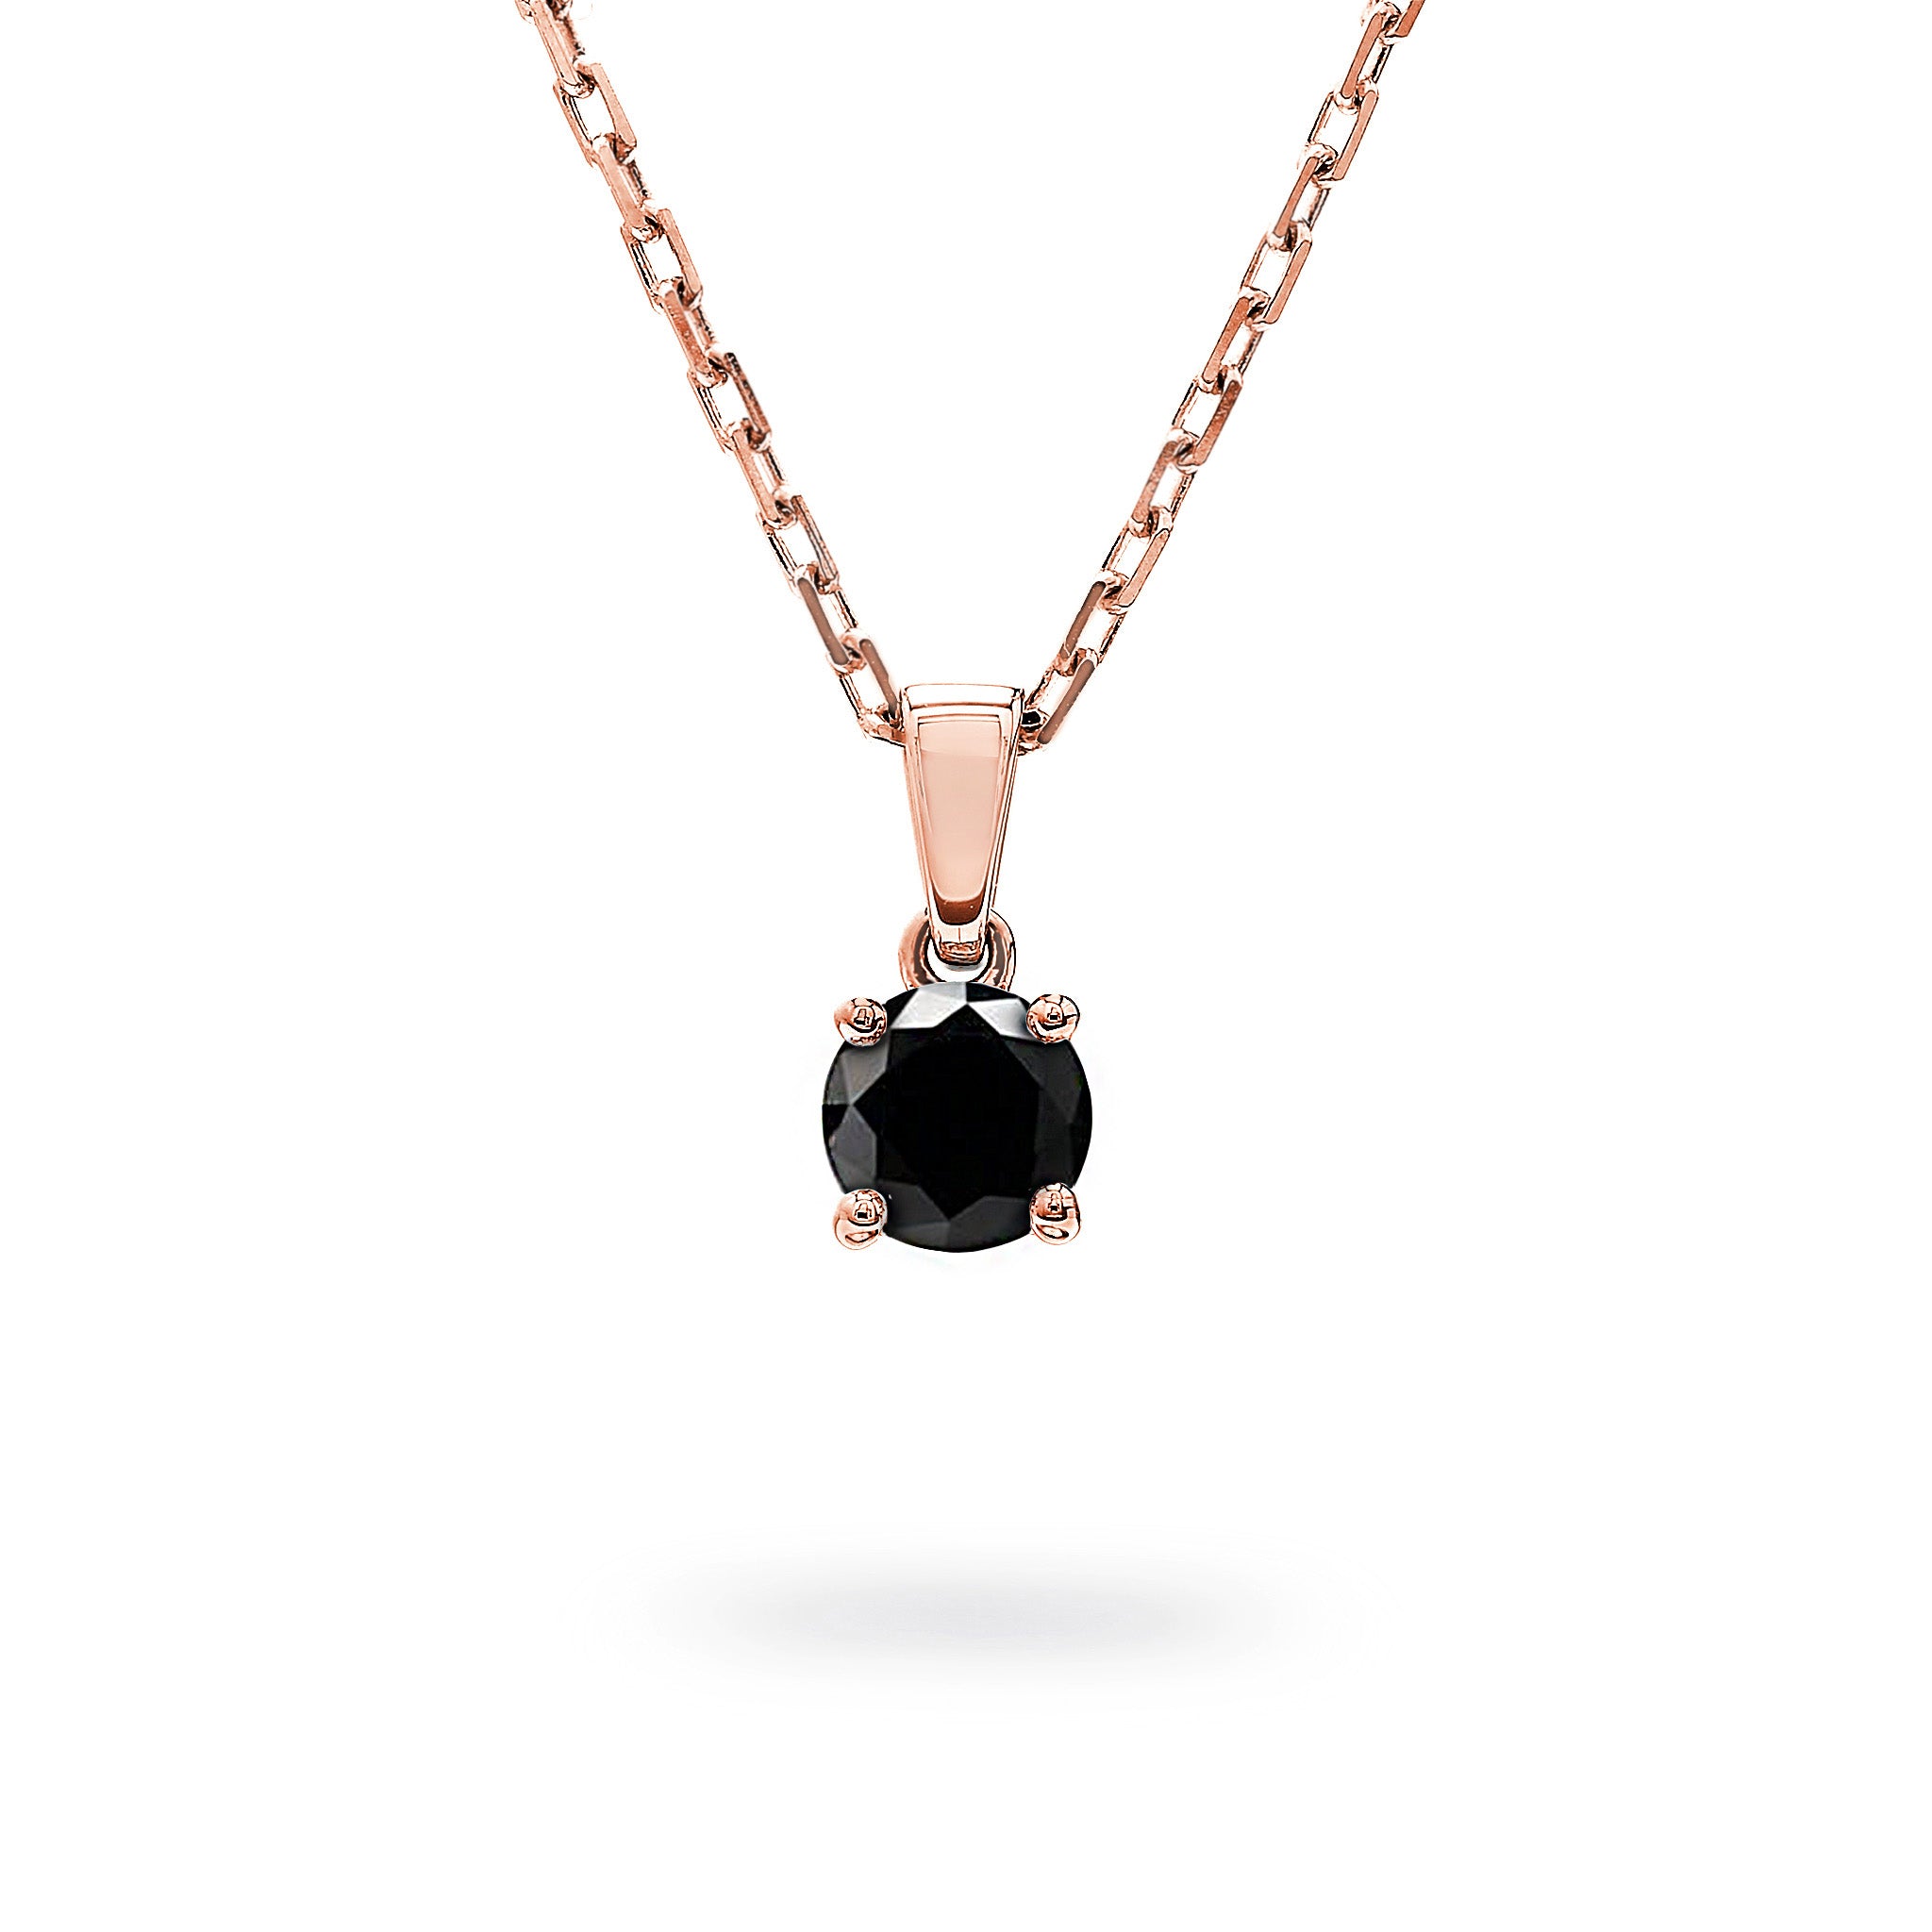 Shimansky - Black Diamond Solitaire Pendant 0.50ct crafted in 18K Rose Gold